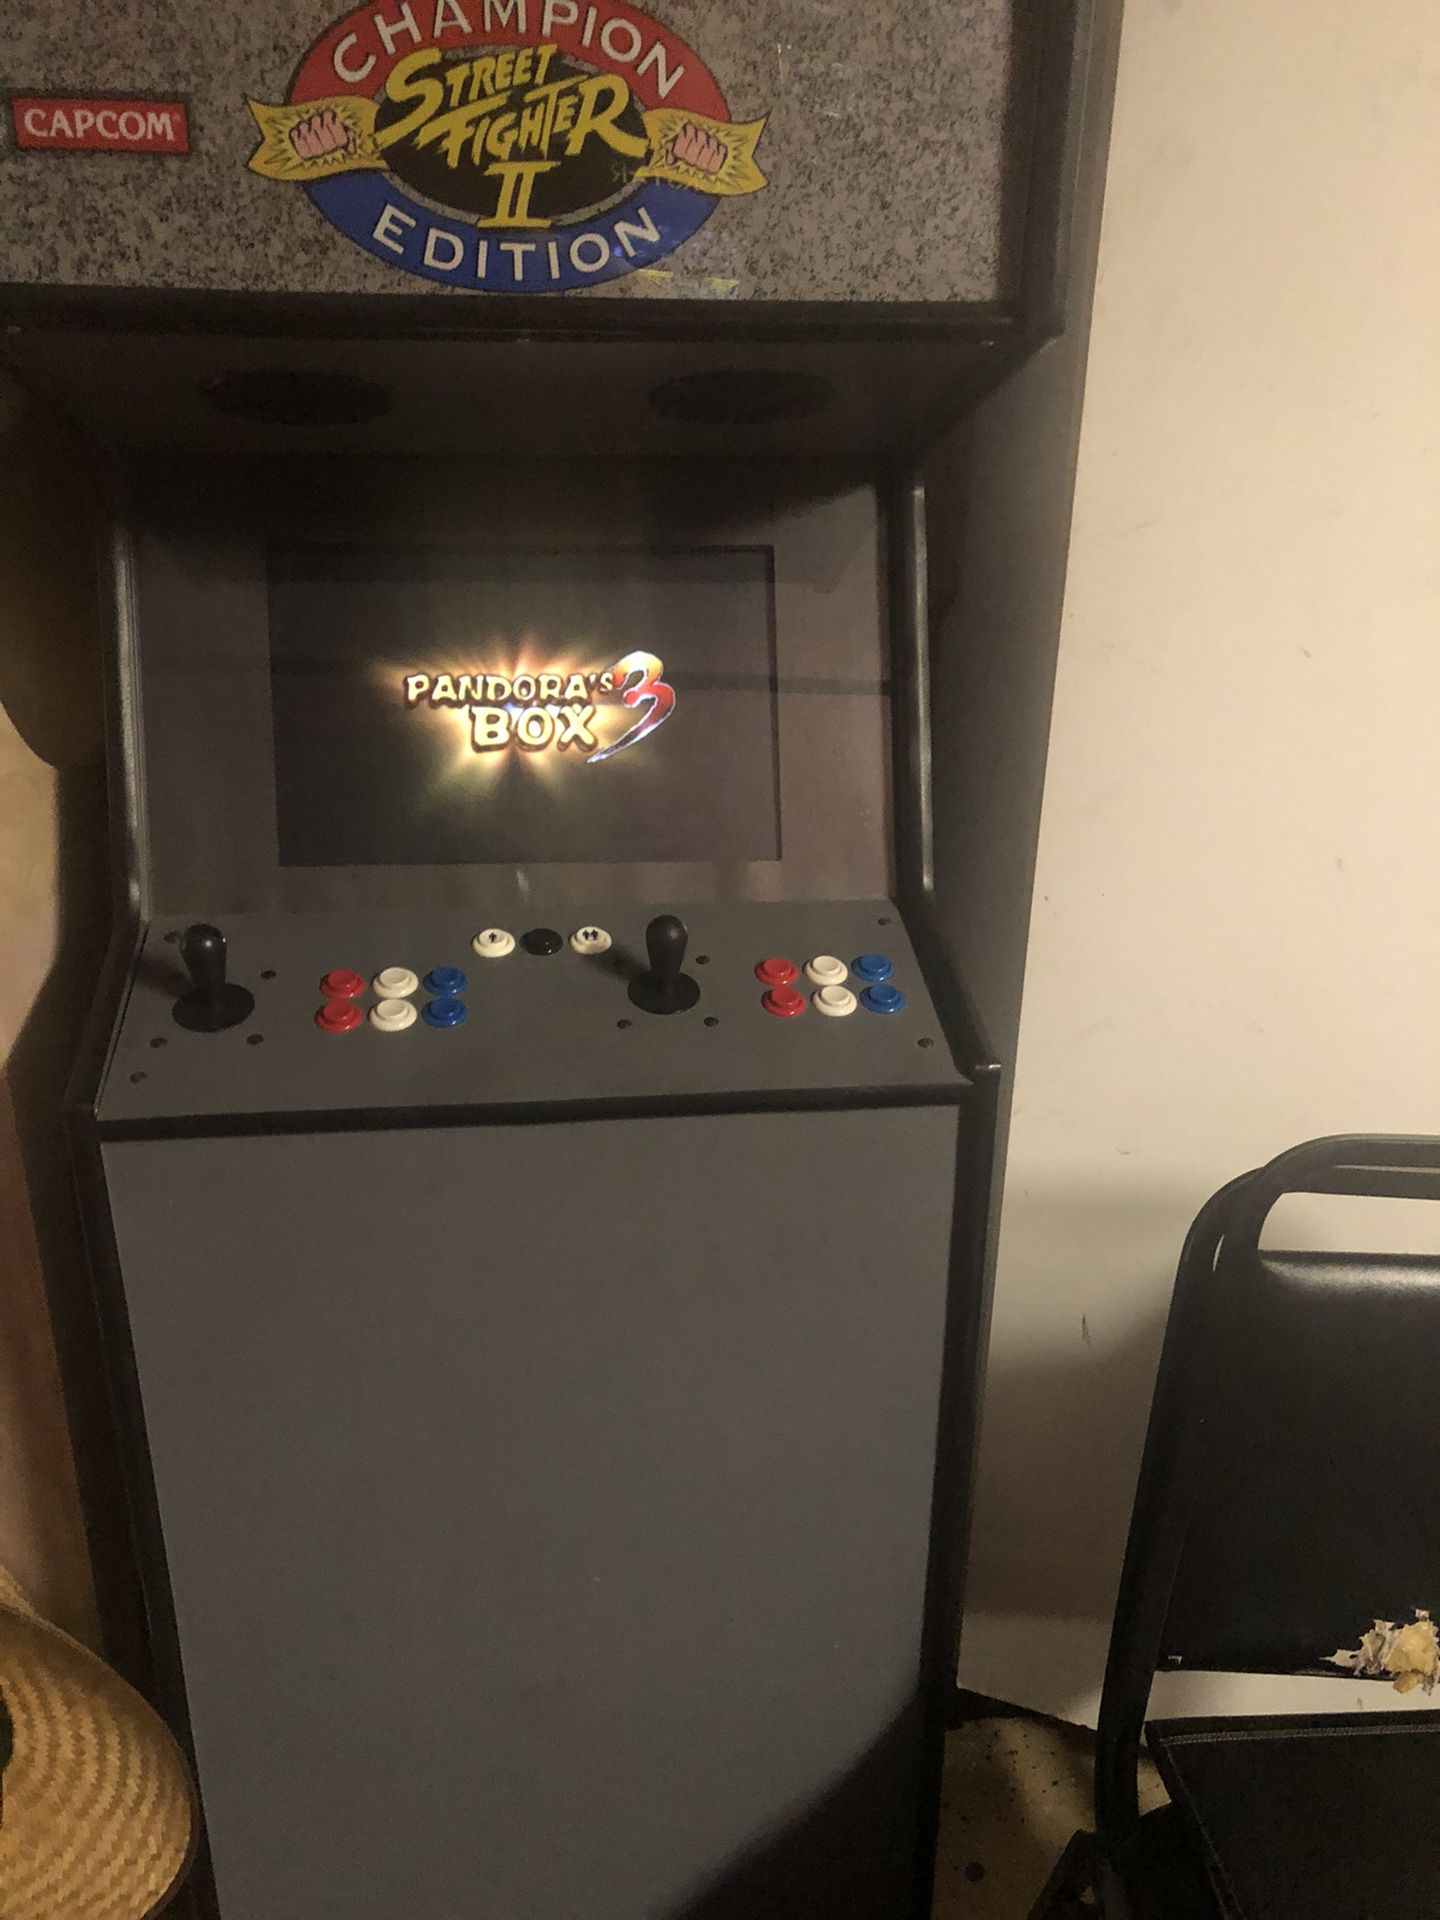 Arcade with over 500 games